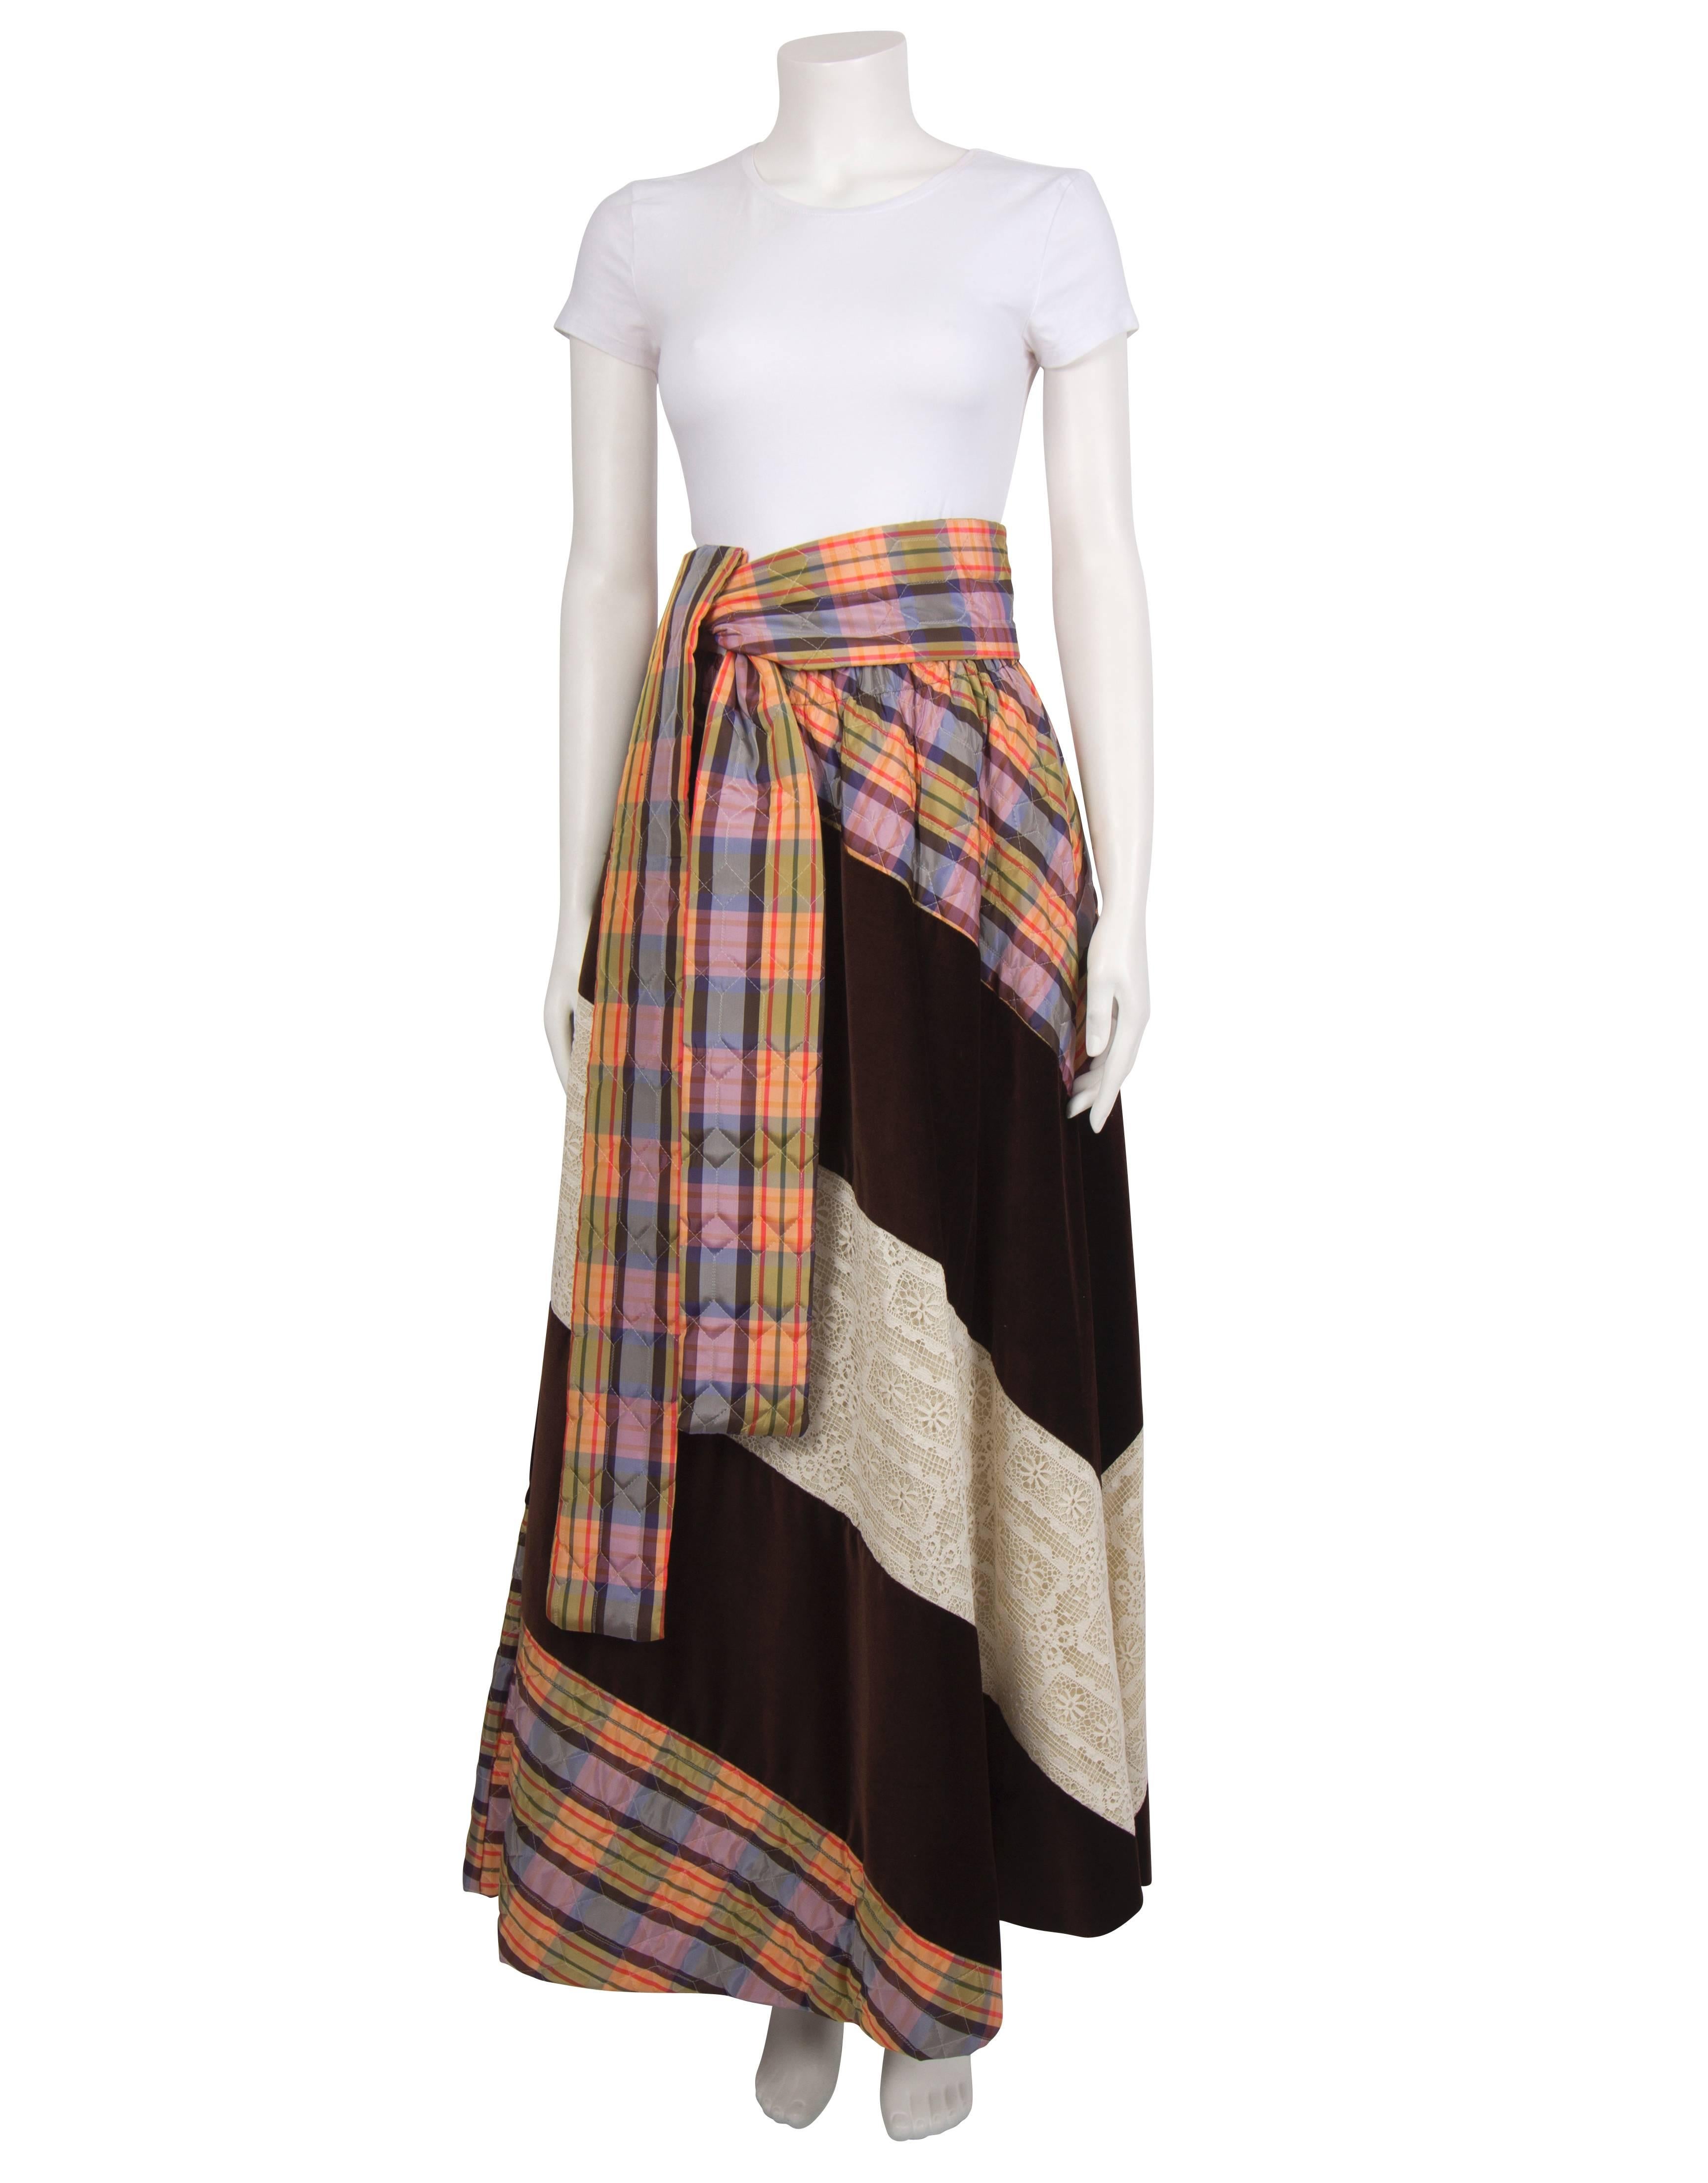 A beautiful example of Chessa Davis' signature patchwork designs, this skirt is made from diagonal panels of brown velvet, cotton lace and a quilted plaid in lilac and orange. The skirt is lined in soft cotton and has an elasticated waist. A wide